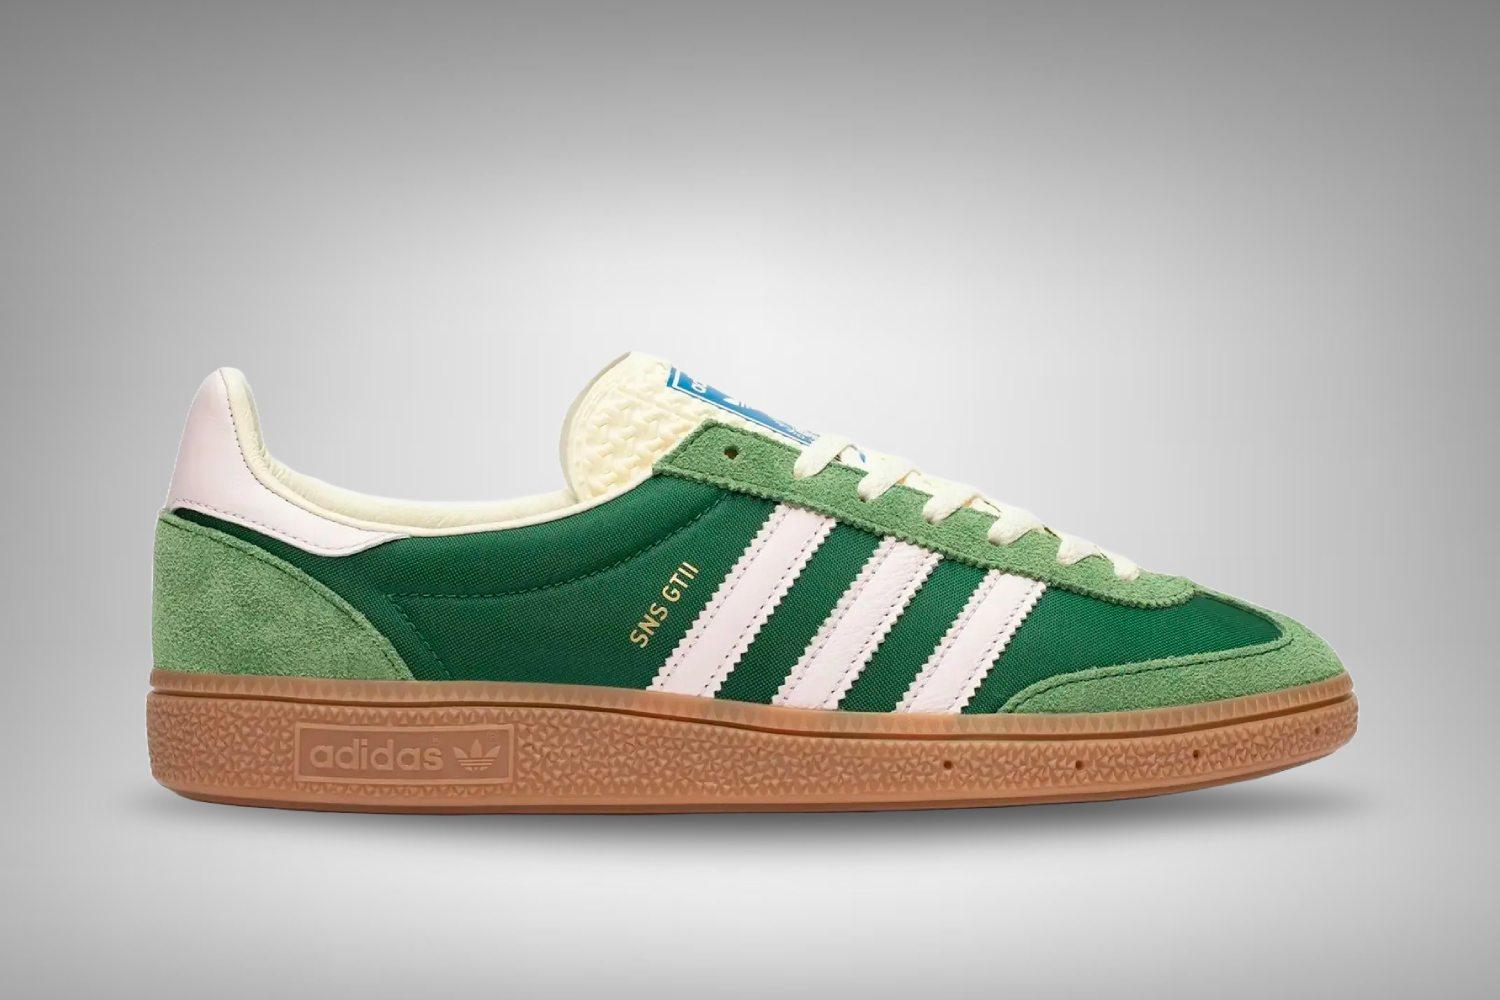 Sneakersnstuff celebrates 25th anniversary with the adidas GT II 'London'